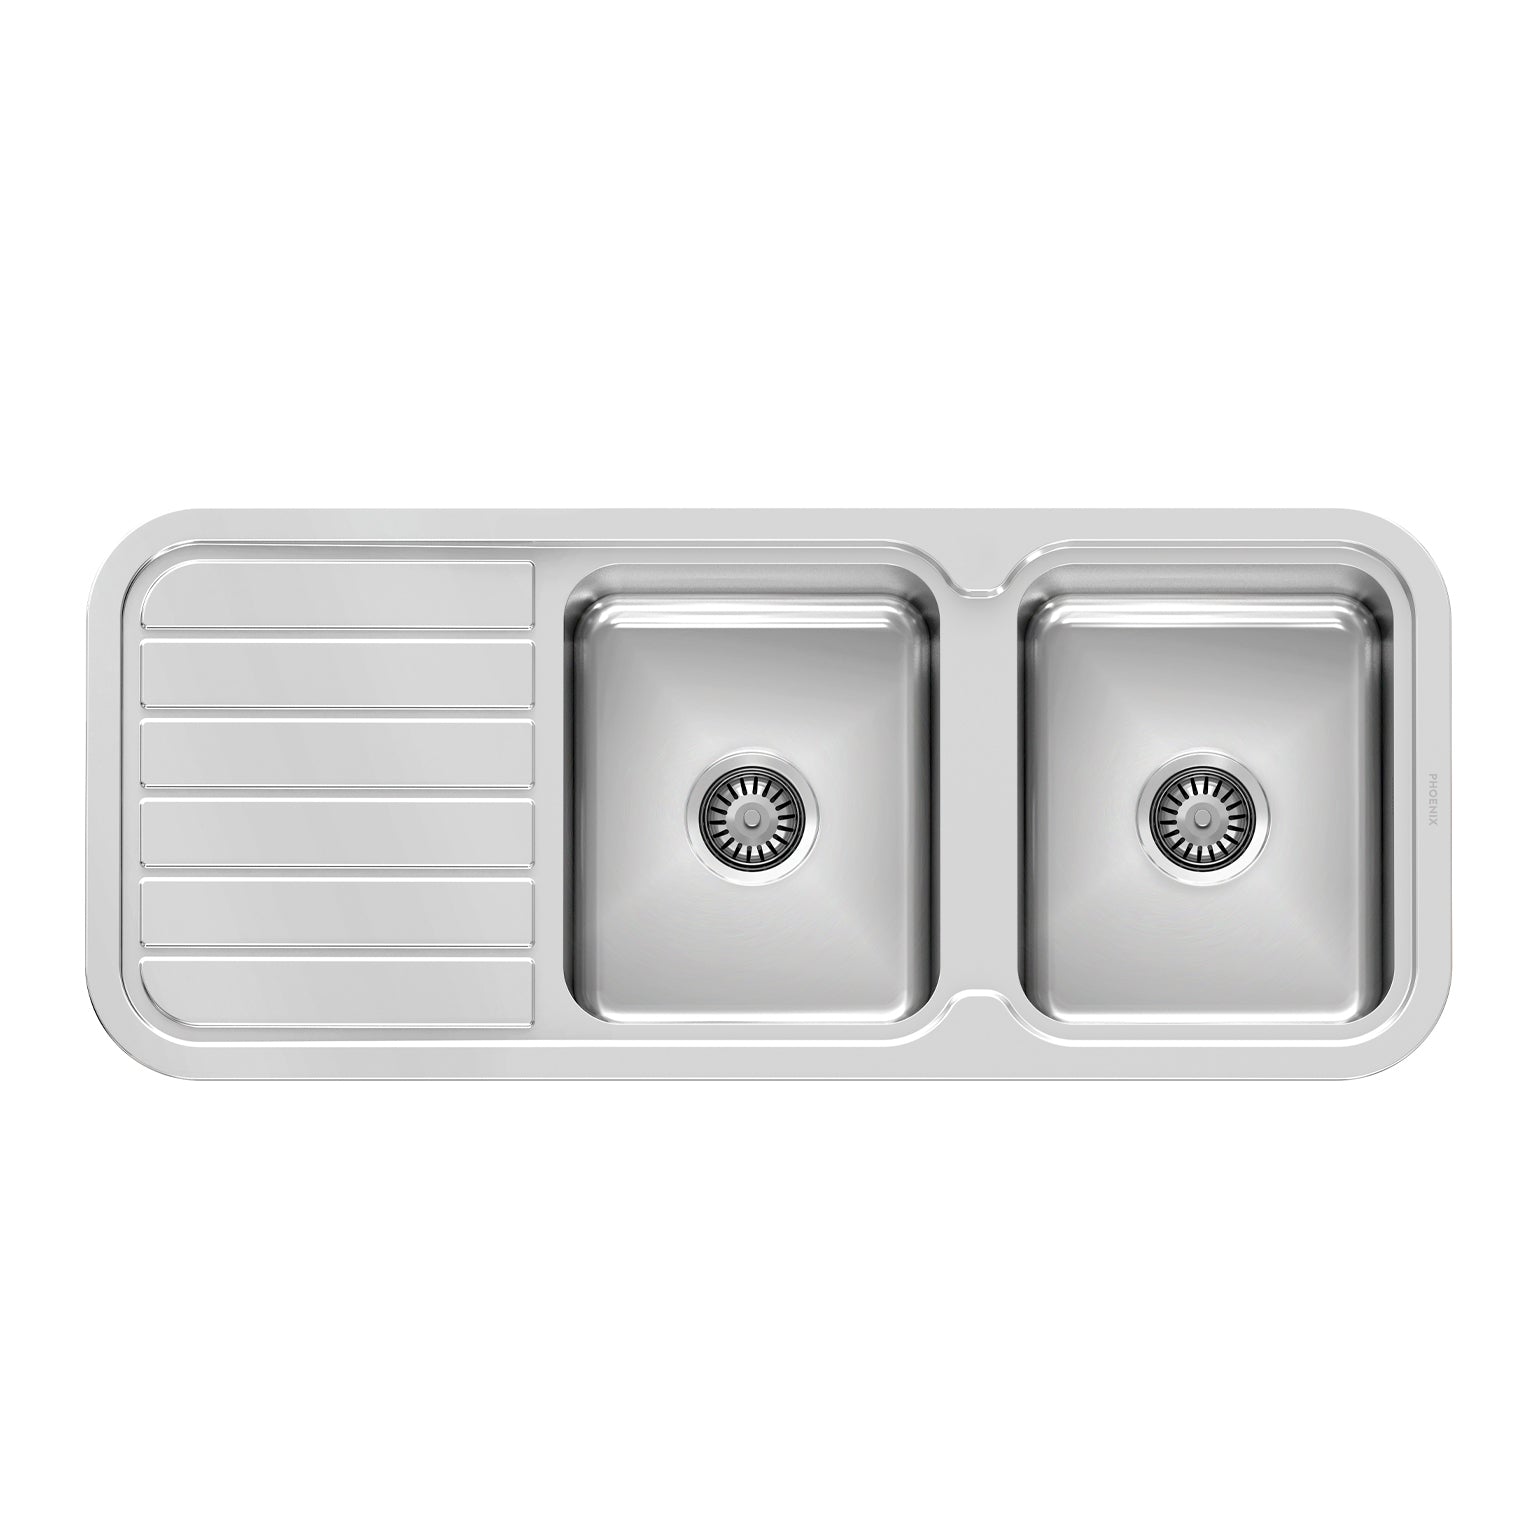 PHOENIX 1000 SERIES DOUBLE BOWL SINK WITH DRAINER AND NO TAPHOLE 1180MM